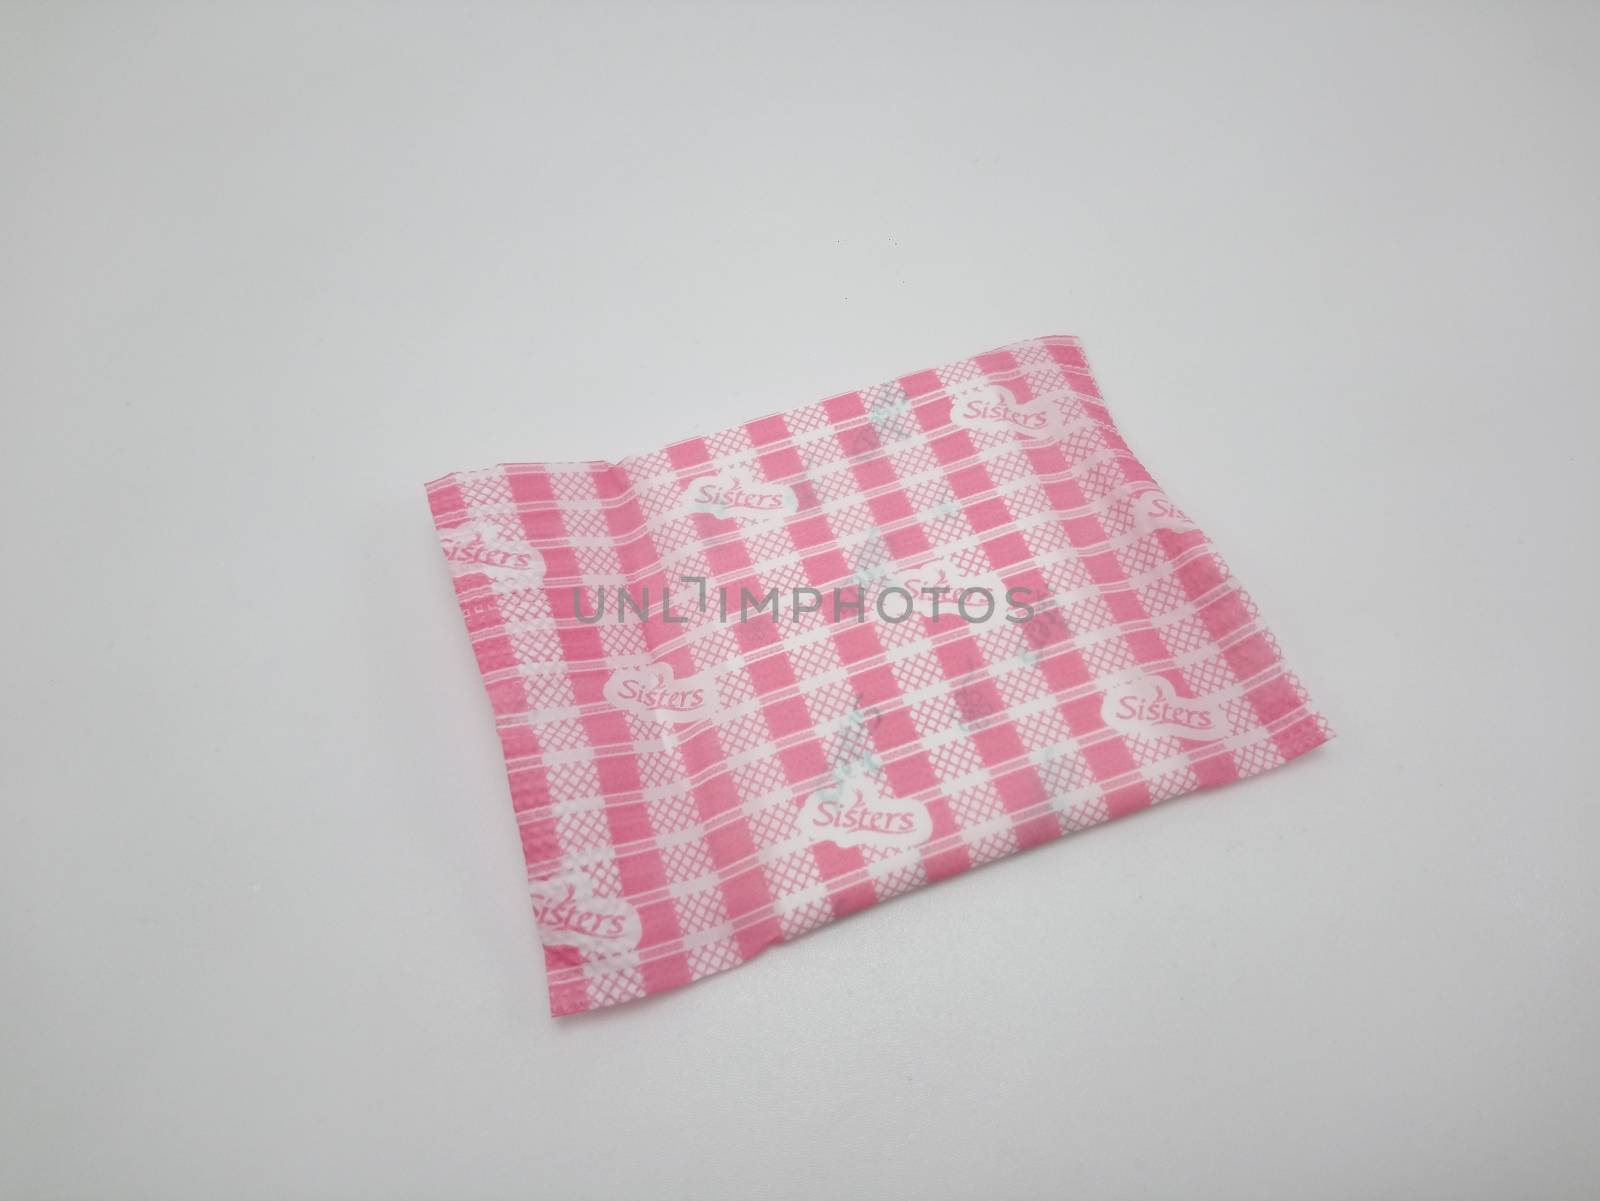 Sisters pantyliners for women in Manila, Philippines by imwaltersy